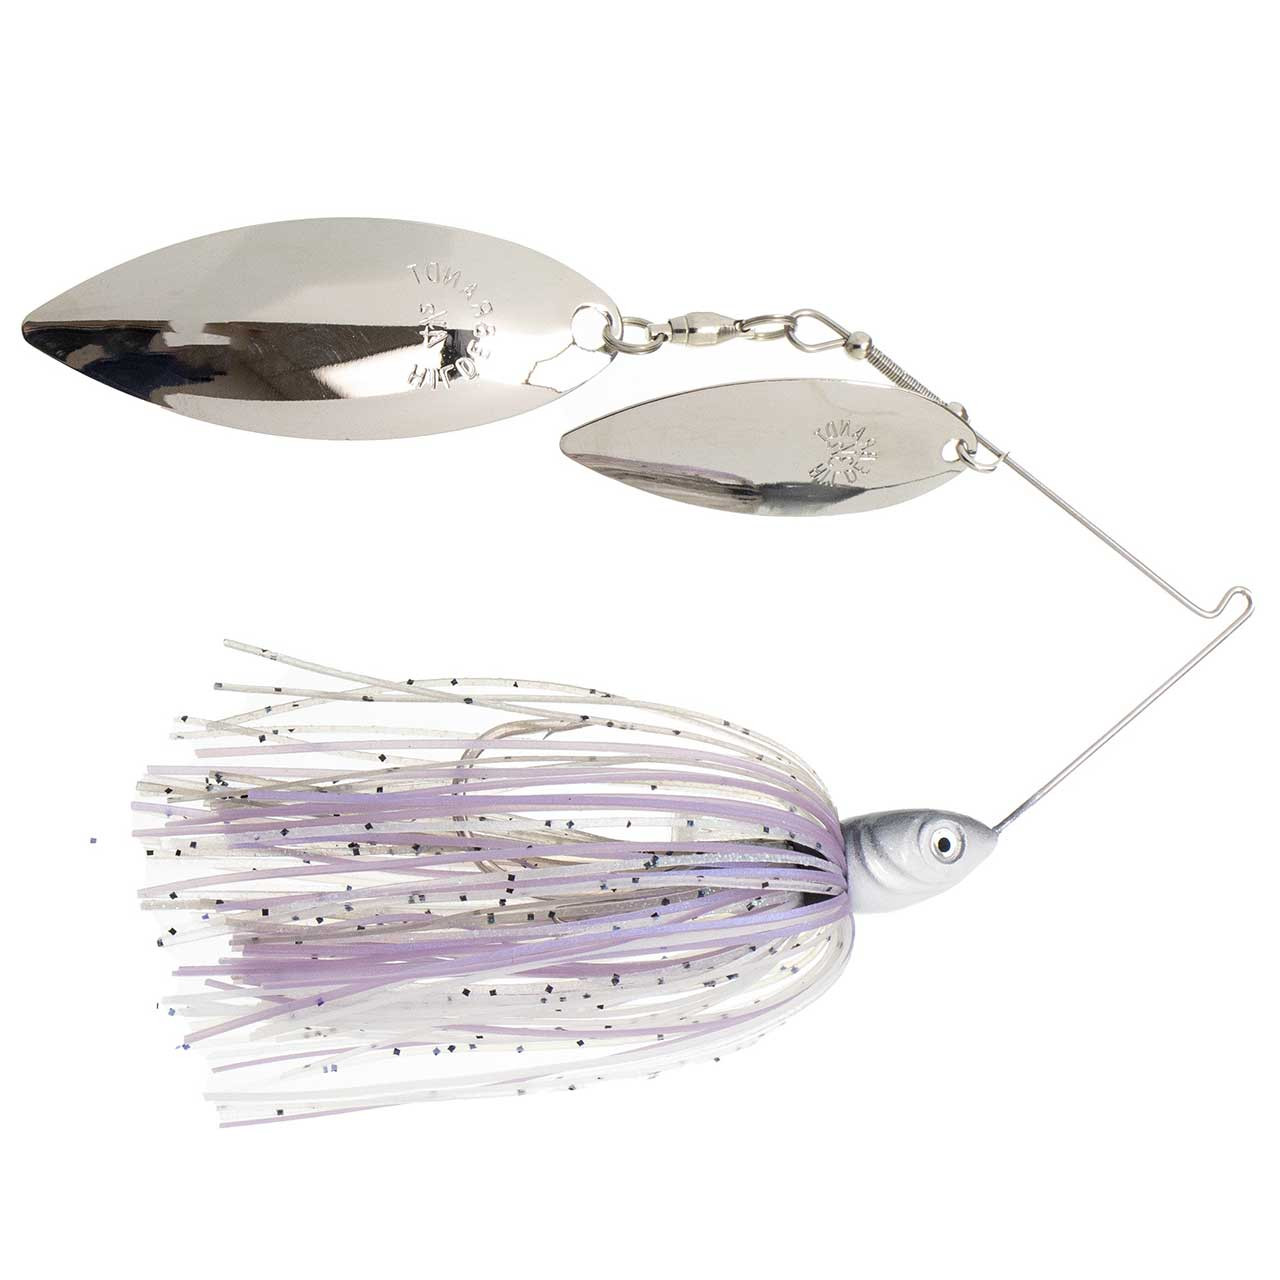 Dirty Jigs Compact Double Willow Spinnerbait 3/8oz / Tactical Shad